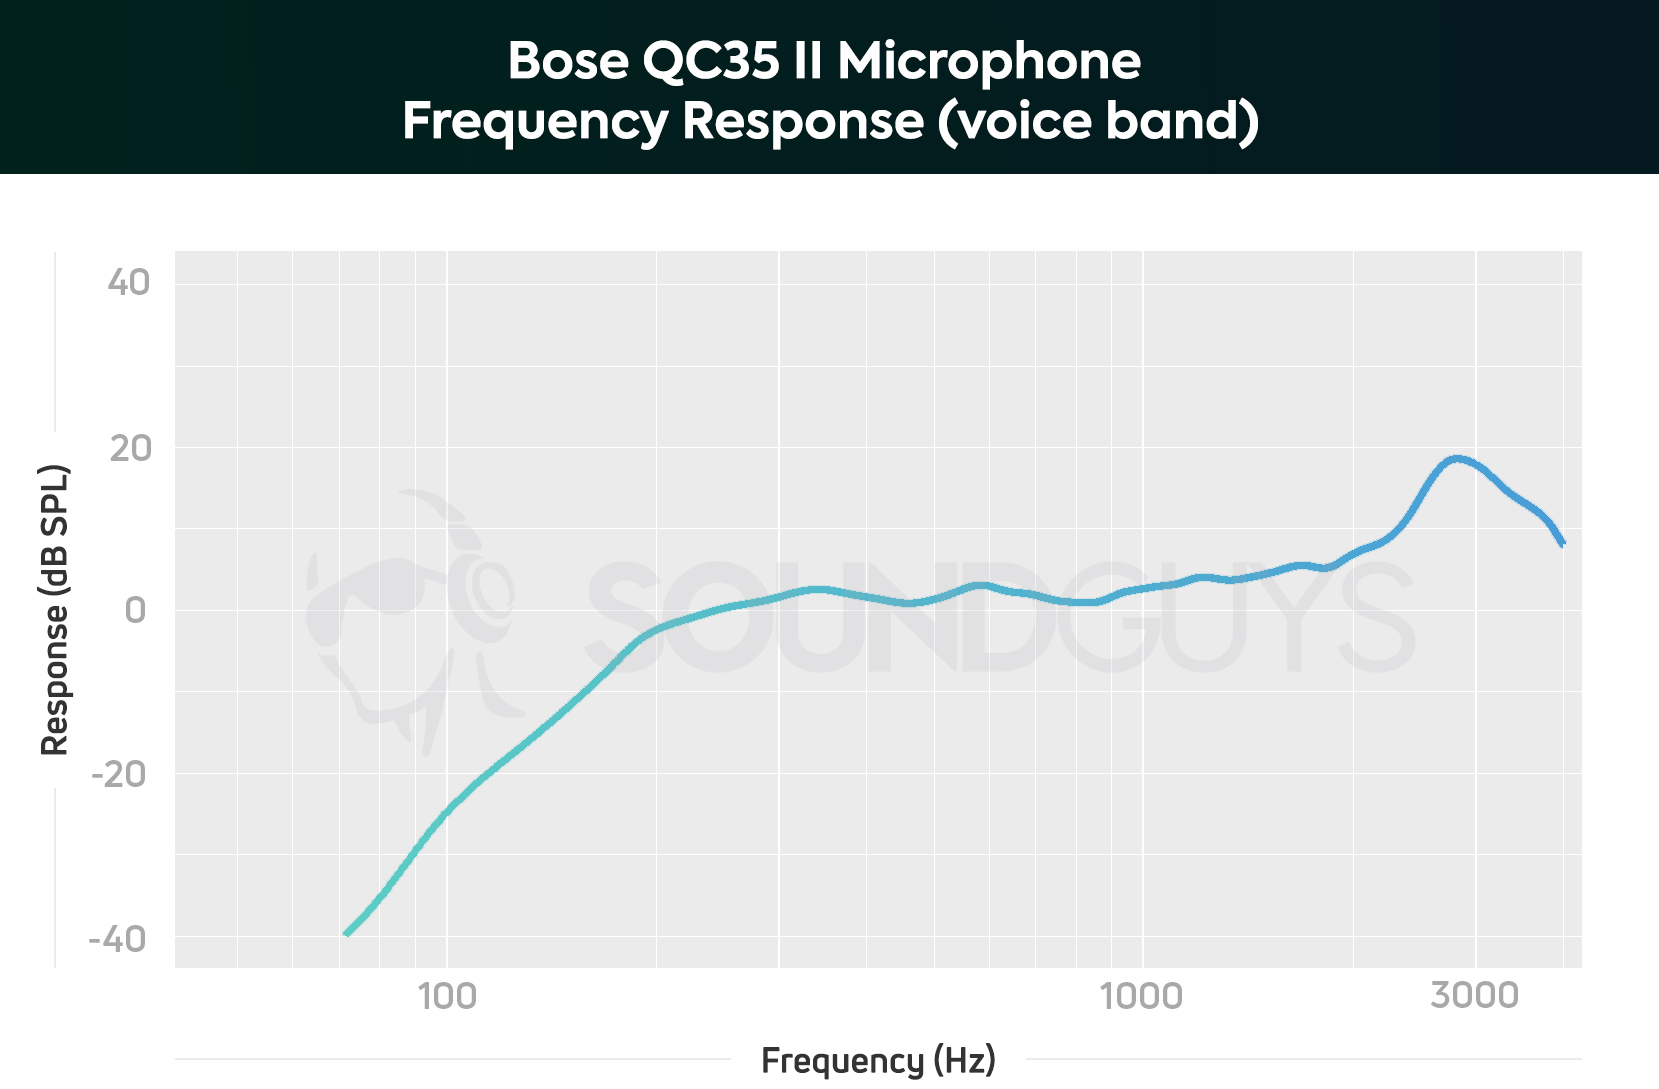 A chart showing the microphone performance of the Bose QC35 II in the voice band with low frequencies heavily attenuated.